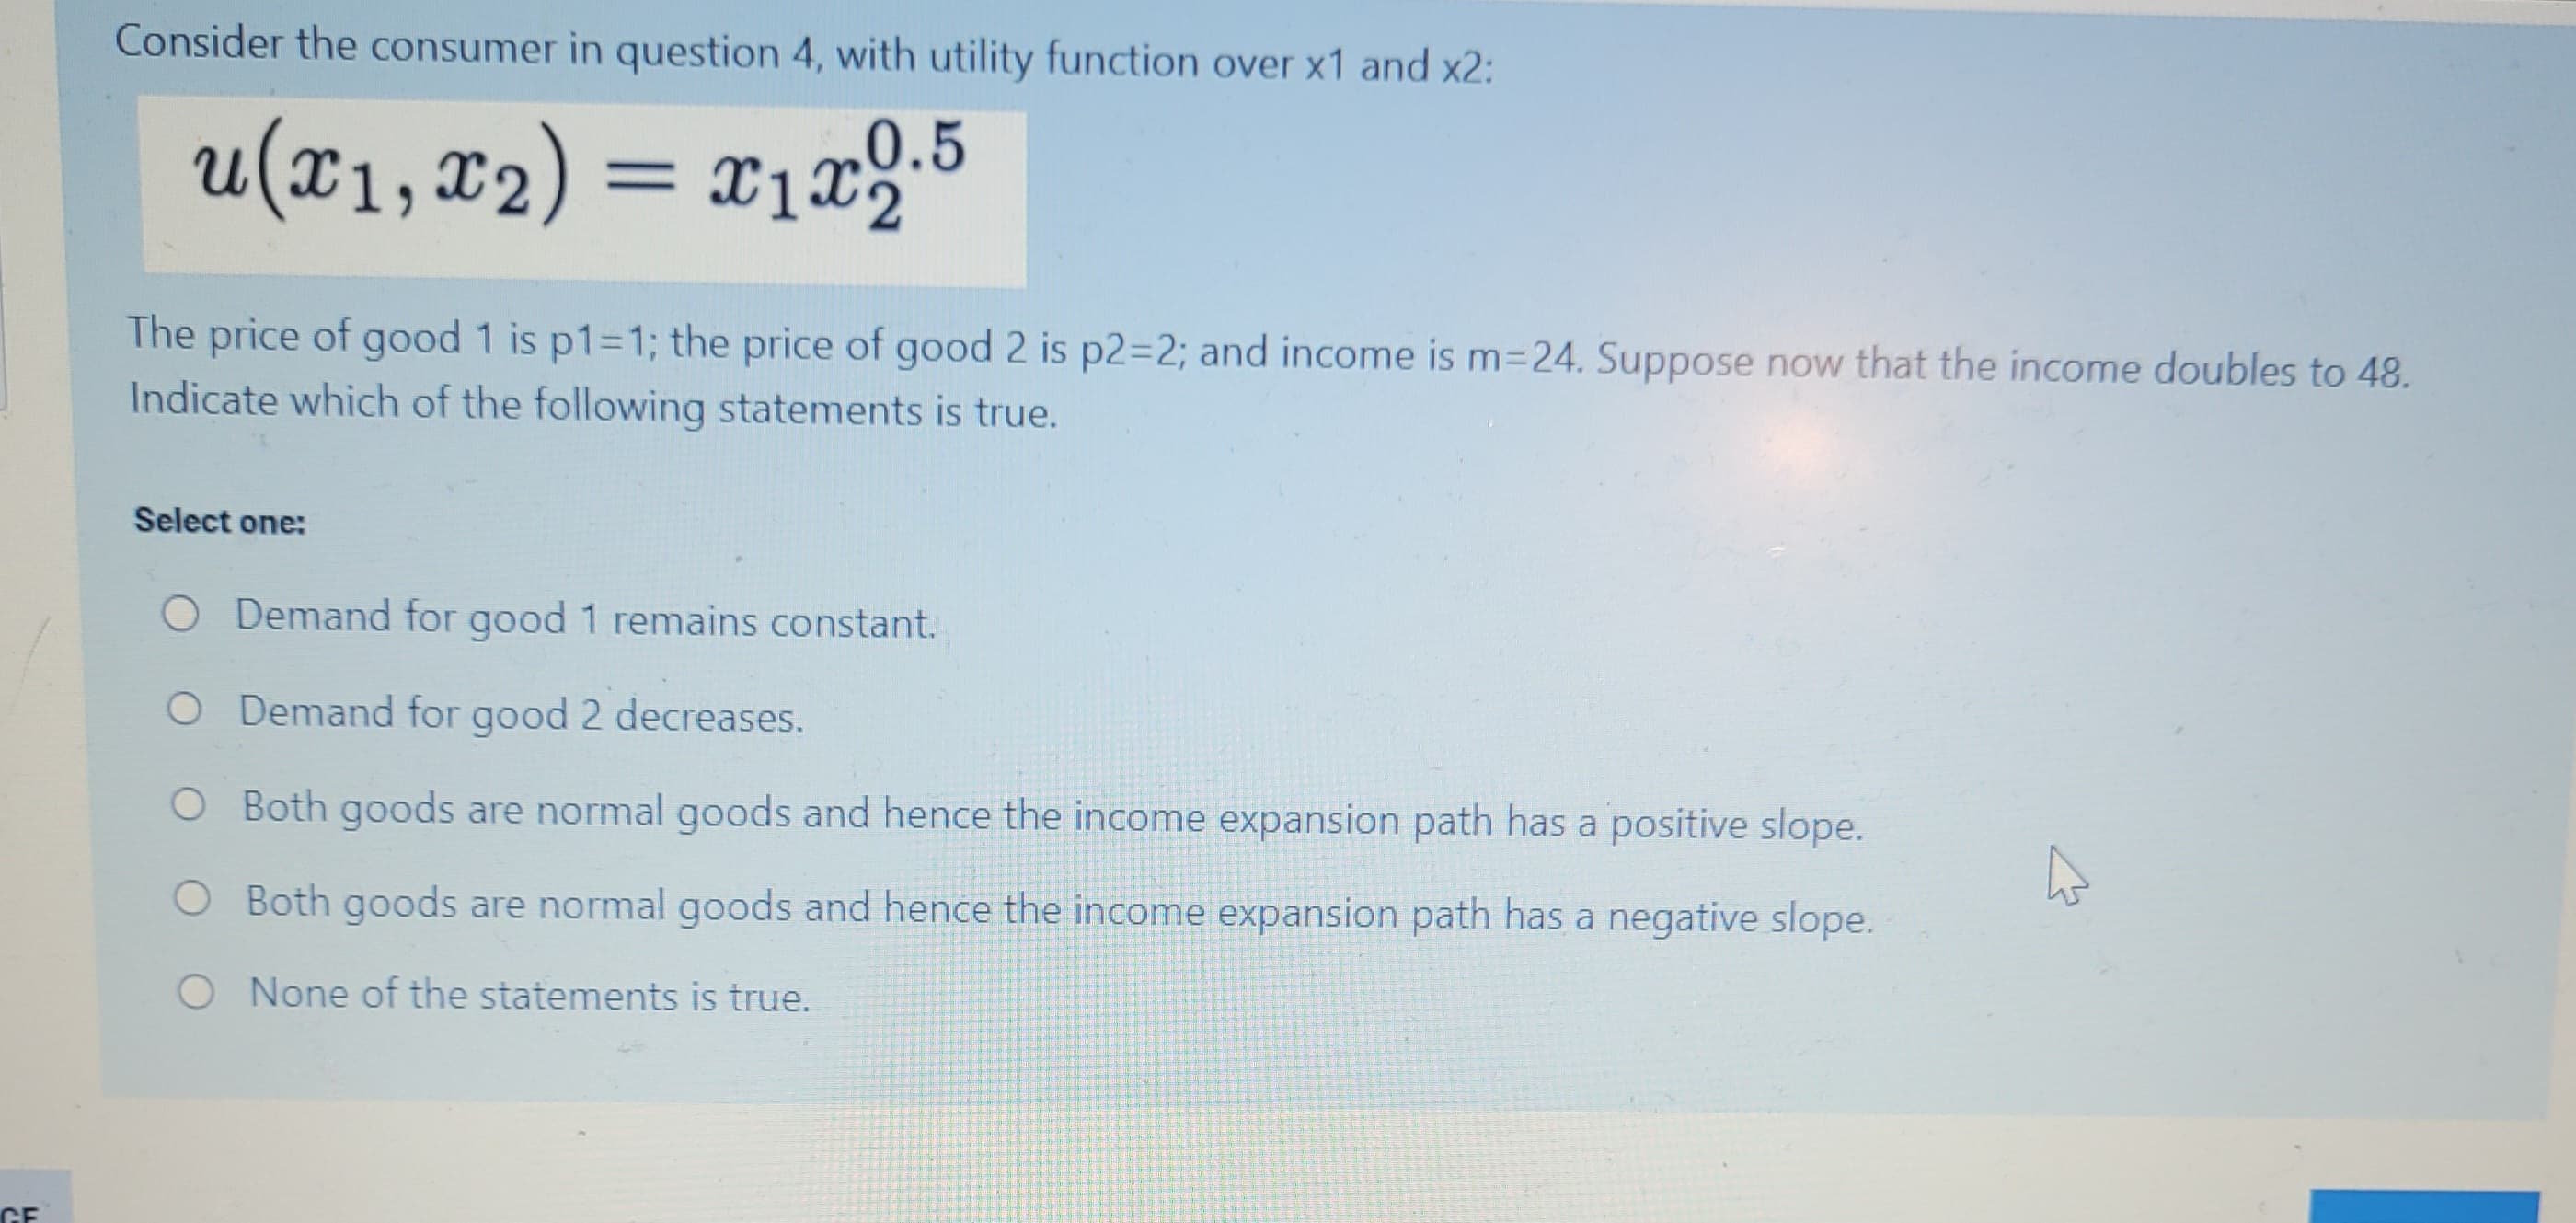 GE
Consider the consumer in question 4, with utility function over x1 and x2:
u(x₁, x₂) = x₁x2.5
x2):
The price of good 1 is p1=1; the price of good 2 is p2=2; and income is m=24. Suppose now that the income doubles to 48.
Indicate which of the following statements is true.
Select one:
O Demand for good 1 remains constant.
O Demand for good 2 decreases.
O Both goods are normal goods and hence the income expansion path has a positive slope.
O Both goods are normal goods and hence the income expansion path has a negative slope.
O None of the statements is true.
A